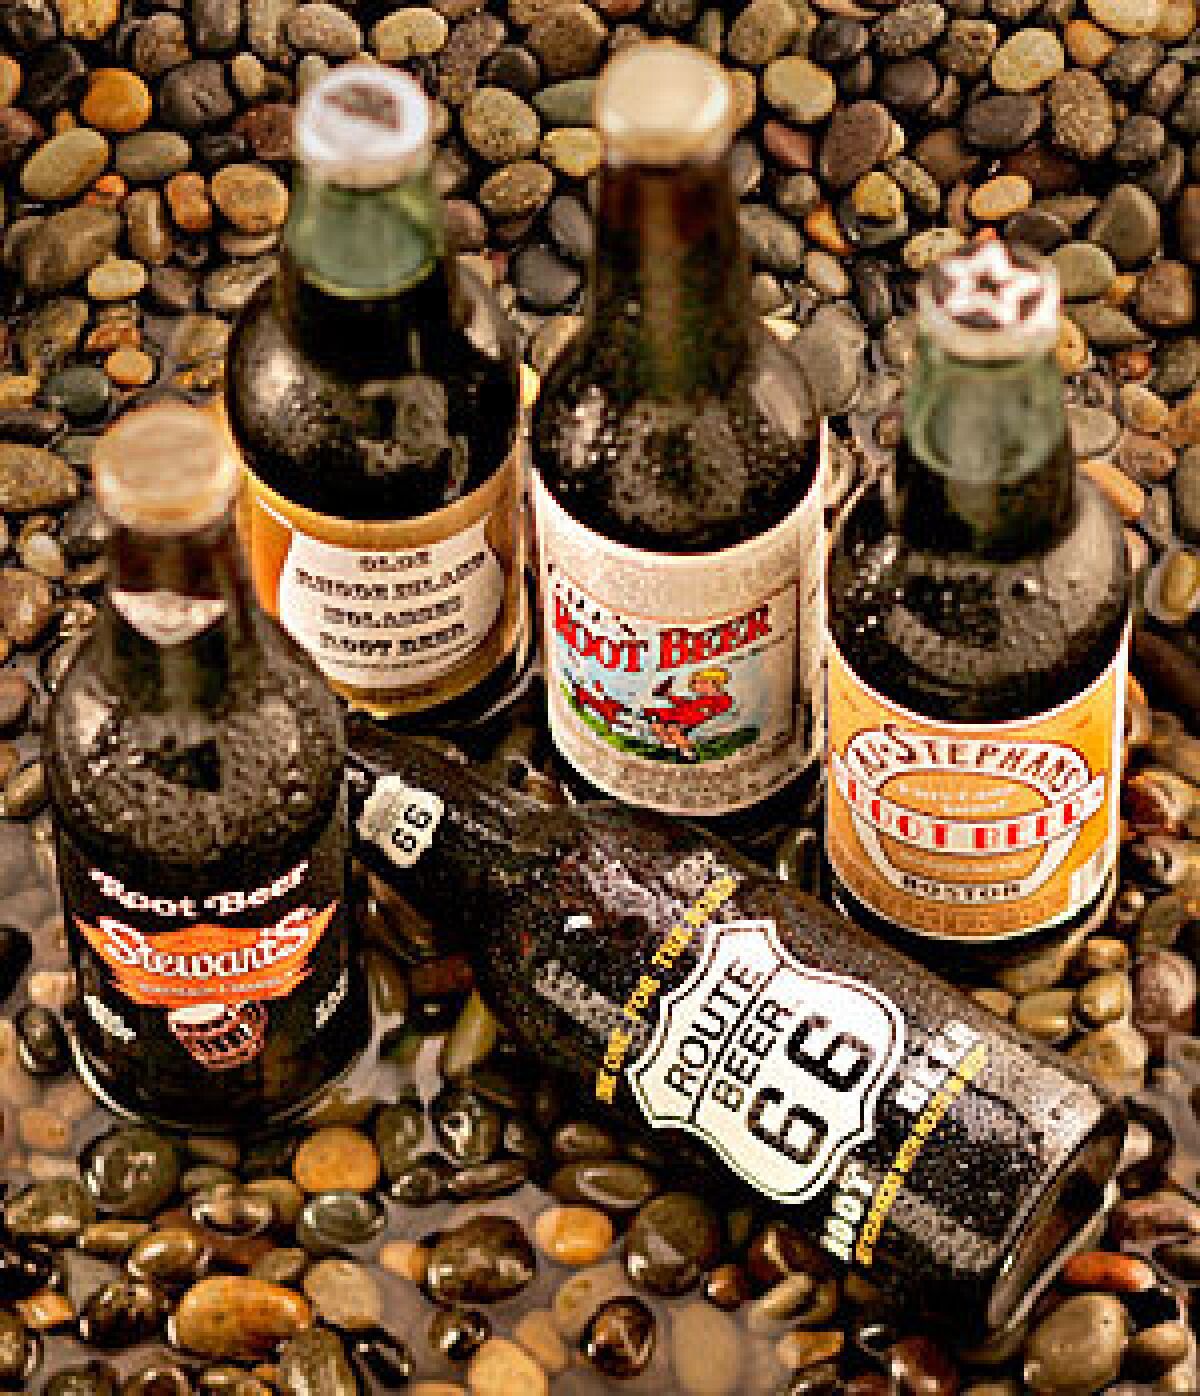 WHO KNEW? These days, the root beer aficionado has many choices, including craft beers.